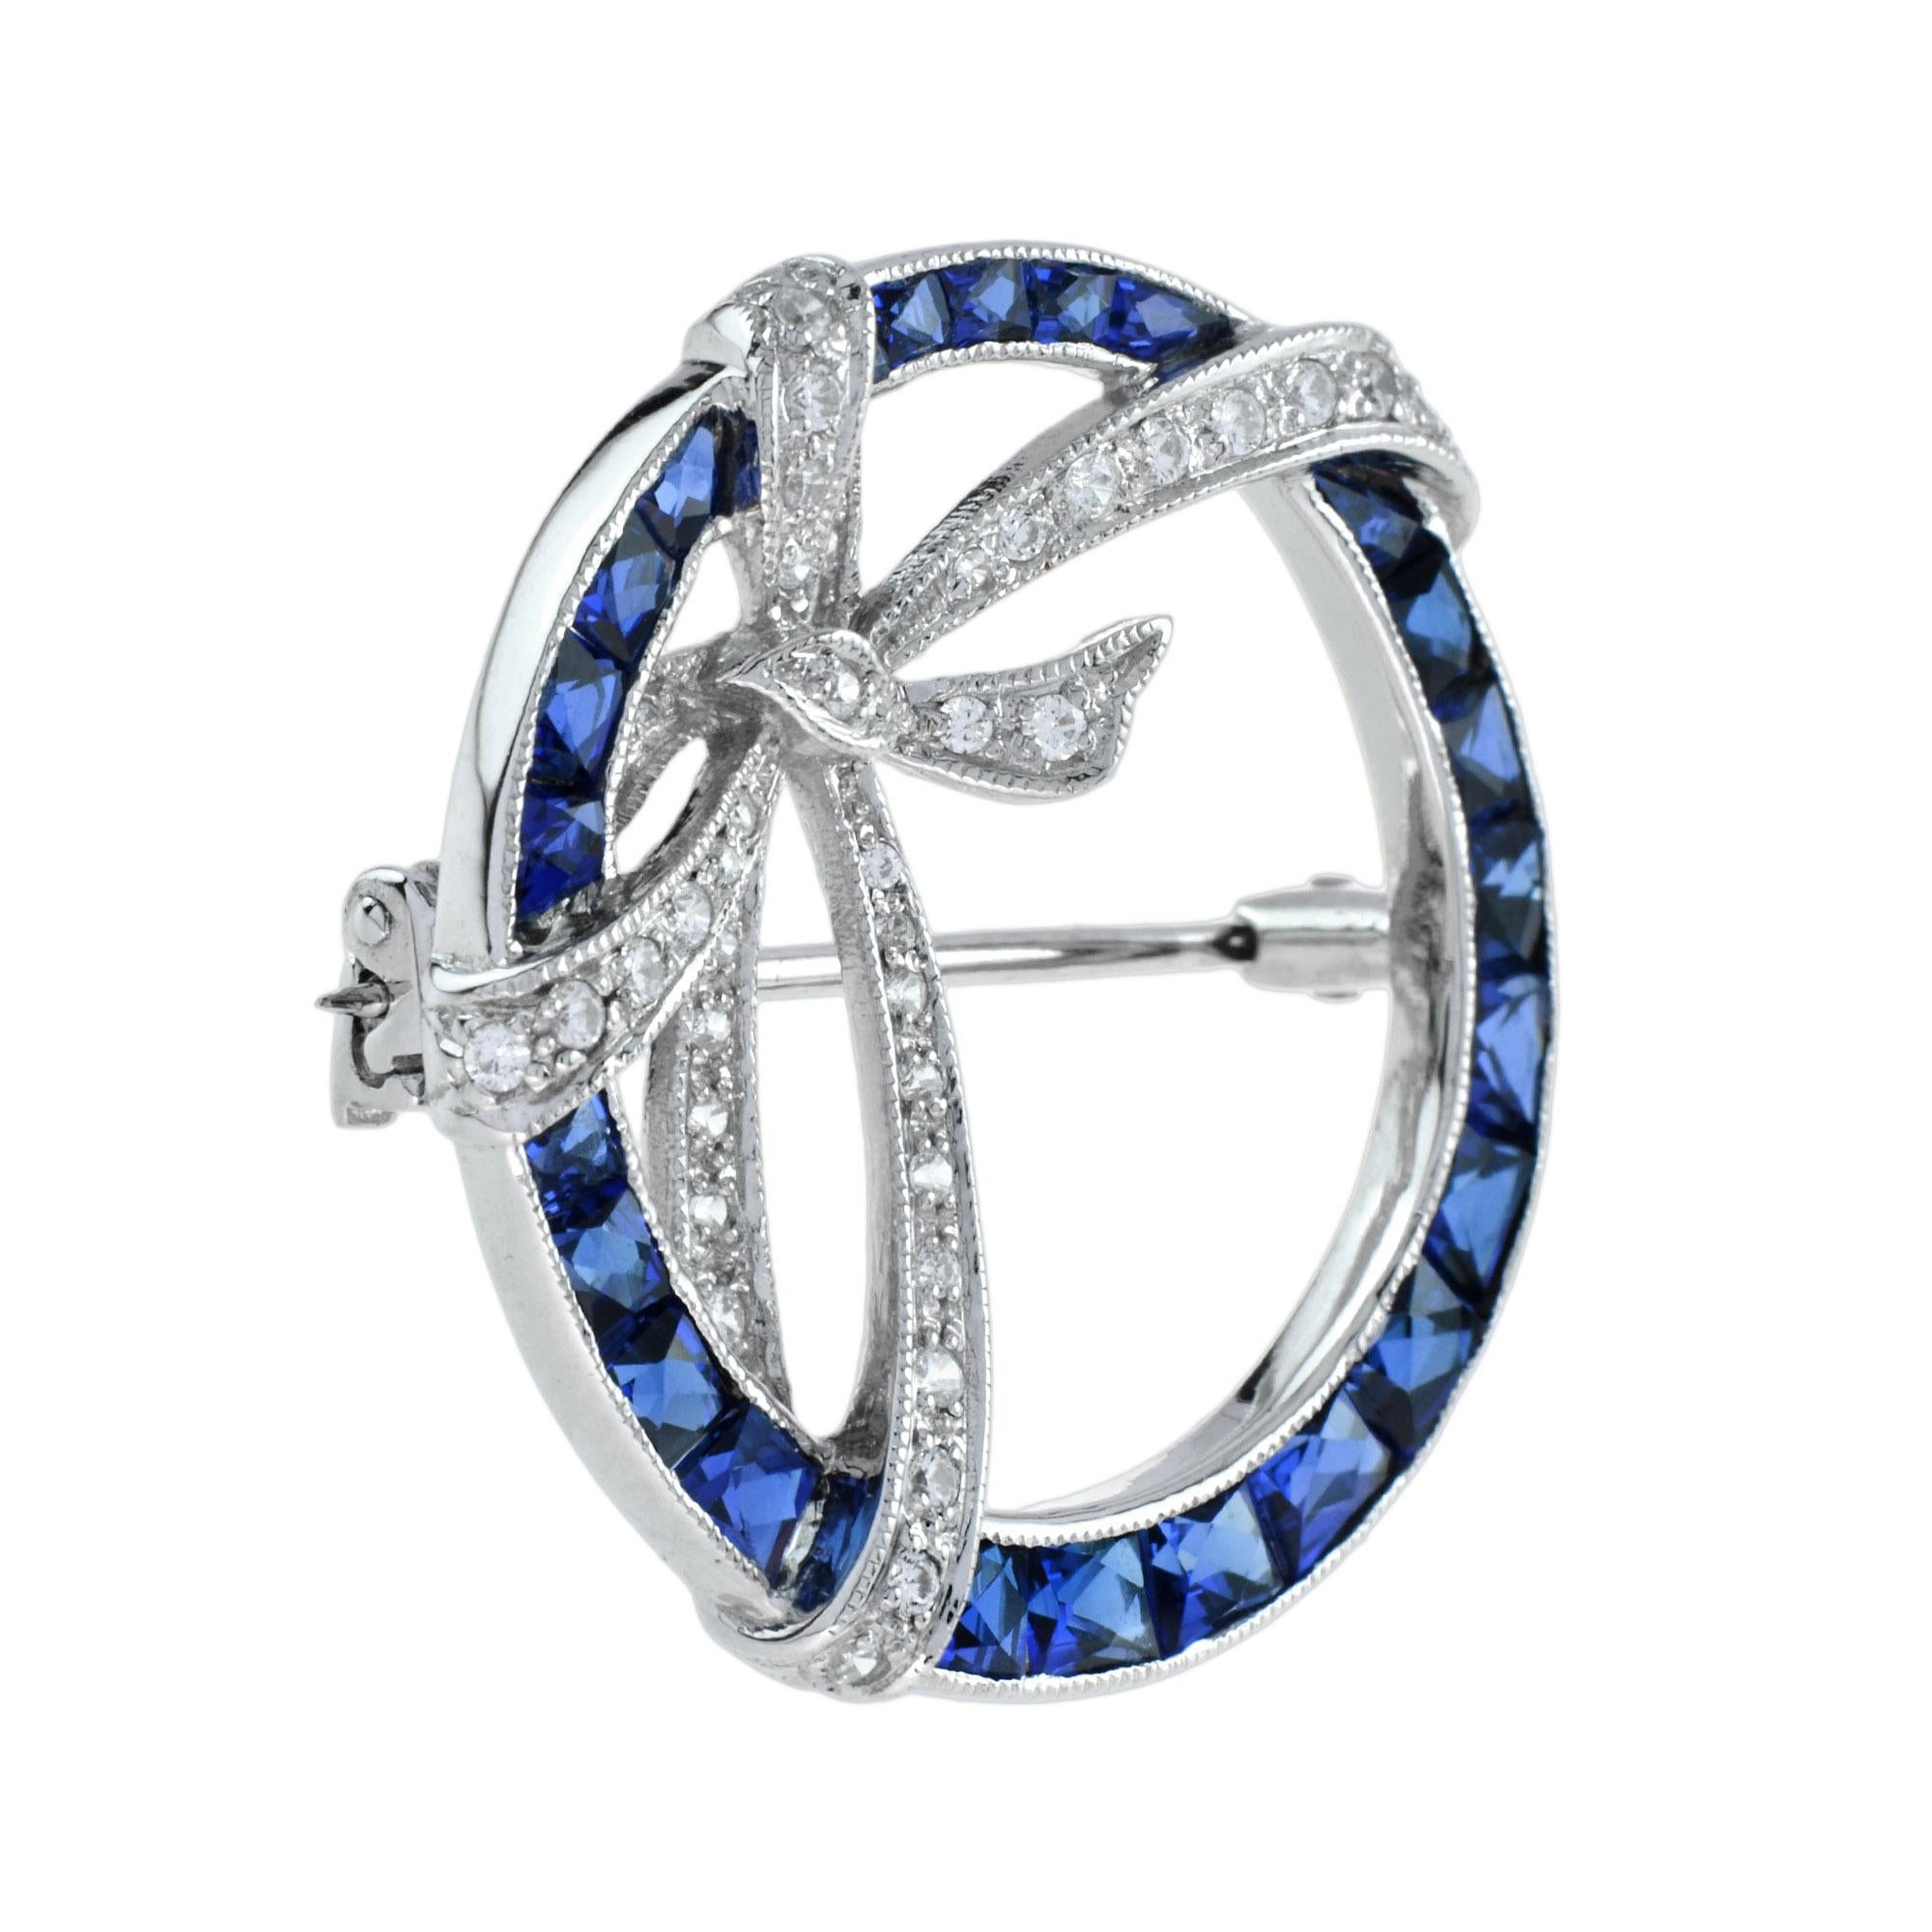 Vintage Art Deco design brooch pin set with round cut diamonds and French cut sapphires. Designed in 14k white gold with a ribbon circle motif, hinged pin brooch and catch. 

Information
Metal: 14K White Gold
Width: 28 mm.
Length: 29 mm.
Weight: